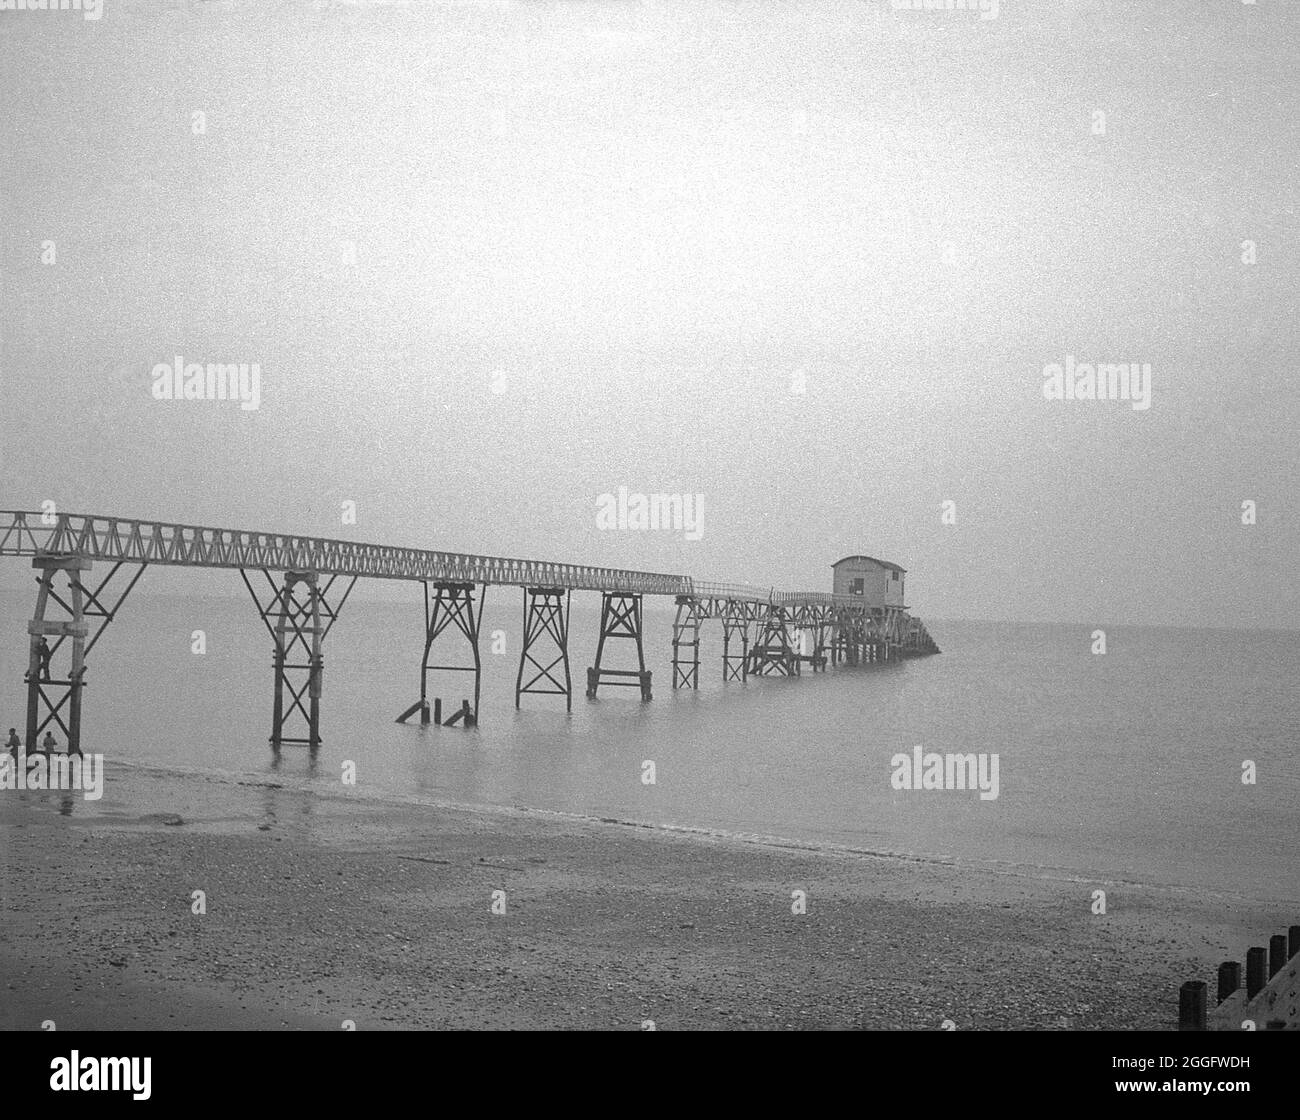 1950s, historical, the wooden gangway and old lifeboat station at Selsey, West Sussex, England, UK. A lifeboat service was established in Selsey in 1861. In 1927 to house the station's new motor lifeboat, the boat house was re-built and this structure is seen in the picture. This slipway station was again rebuilt in the late 1950s but was taken down in 2017. Stock Photo